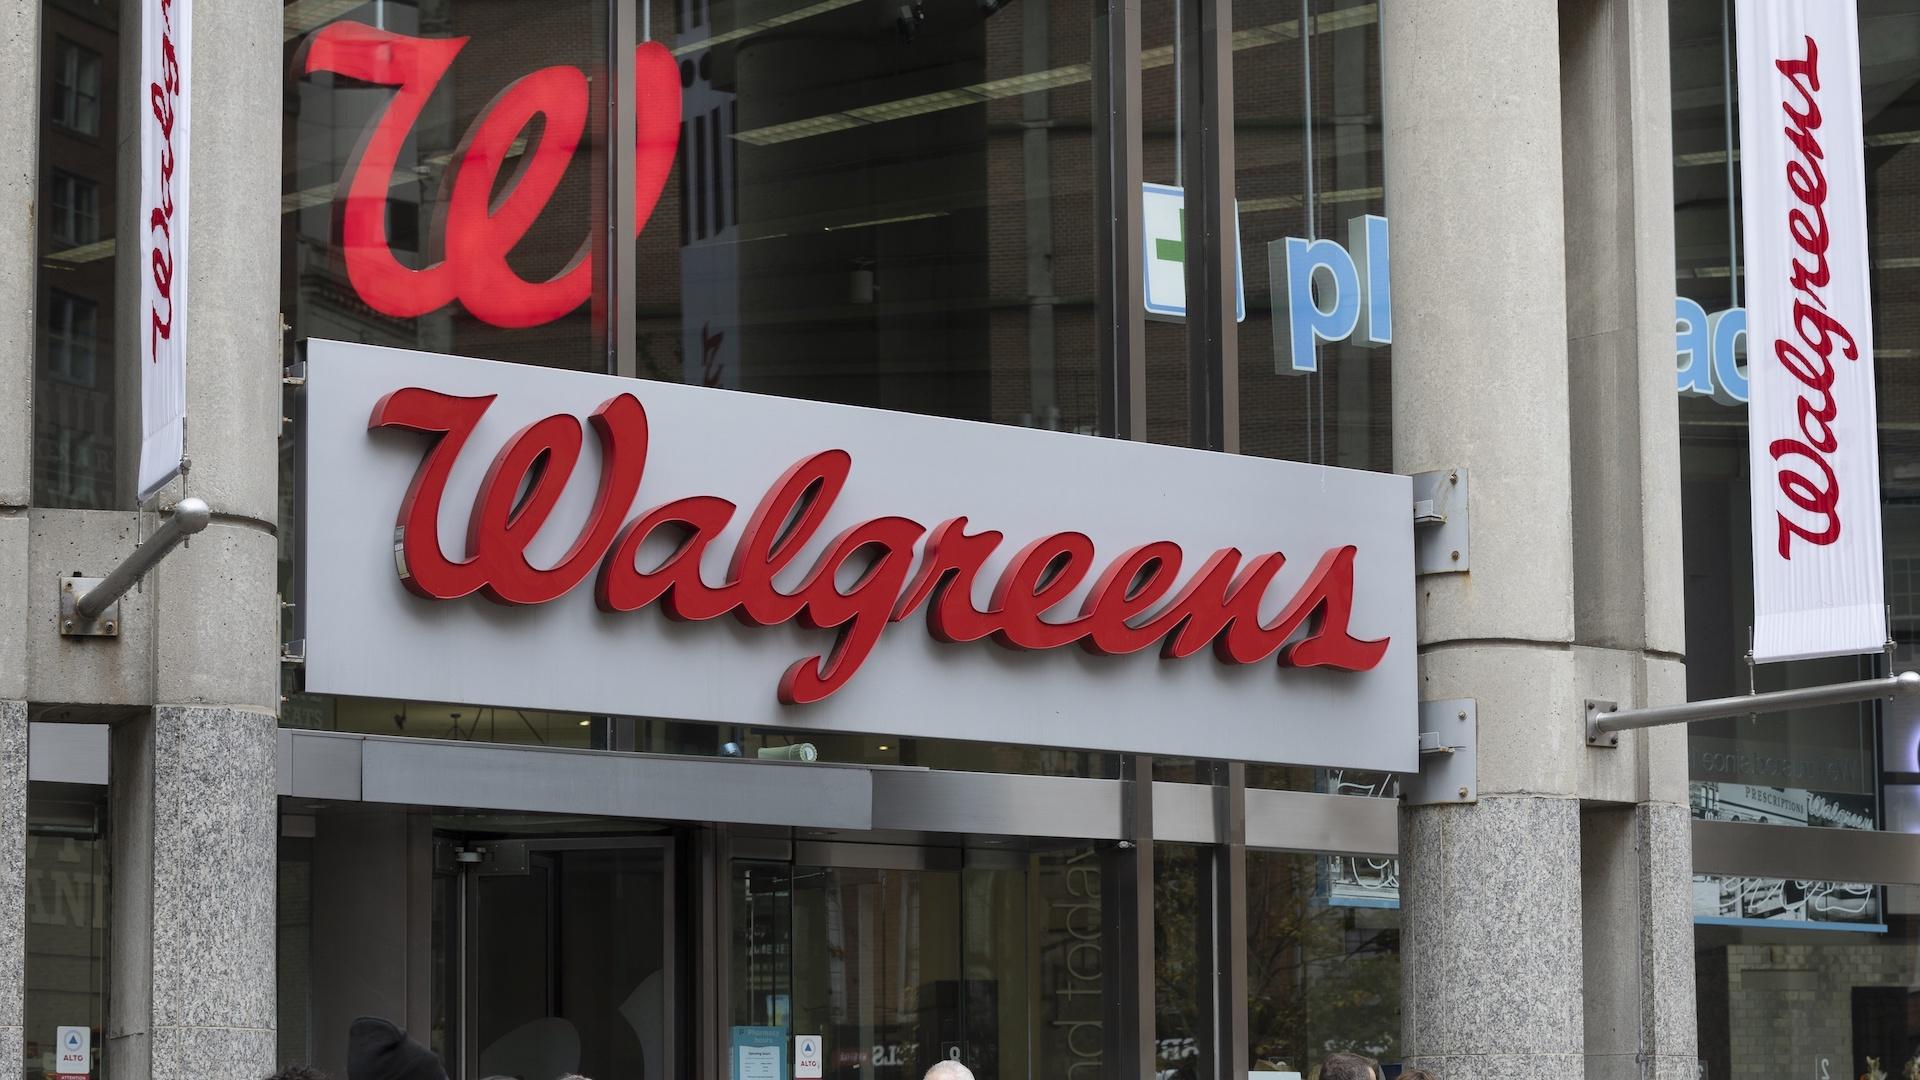 The entrance to a Walgreens is seen on Oct. 14, 2022, in Boston. Walgreens dove deeper into the health care sector on Monday, Nov. 7, when its VillageMD unit announced it would acquire another primary and urgent care provider, Summit Health-CityMD, in a deal worth close to $9 billion. (AP Photo/Michael Dwyer, File)